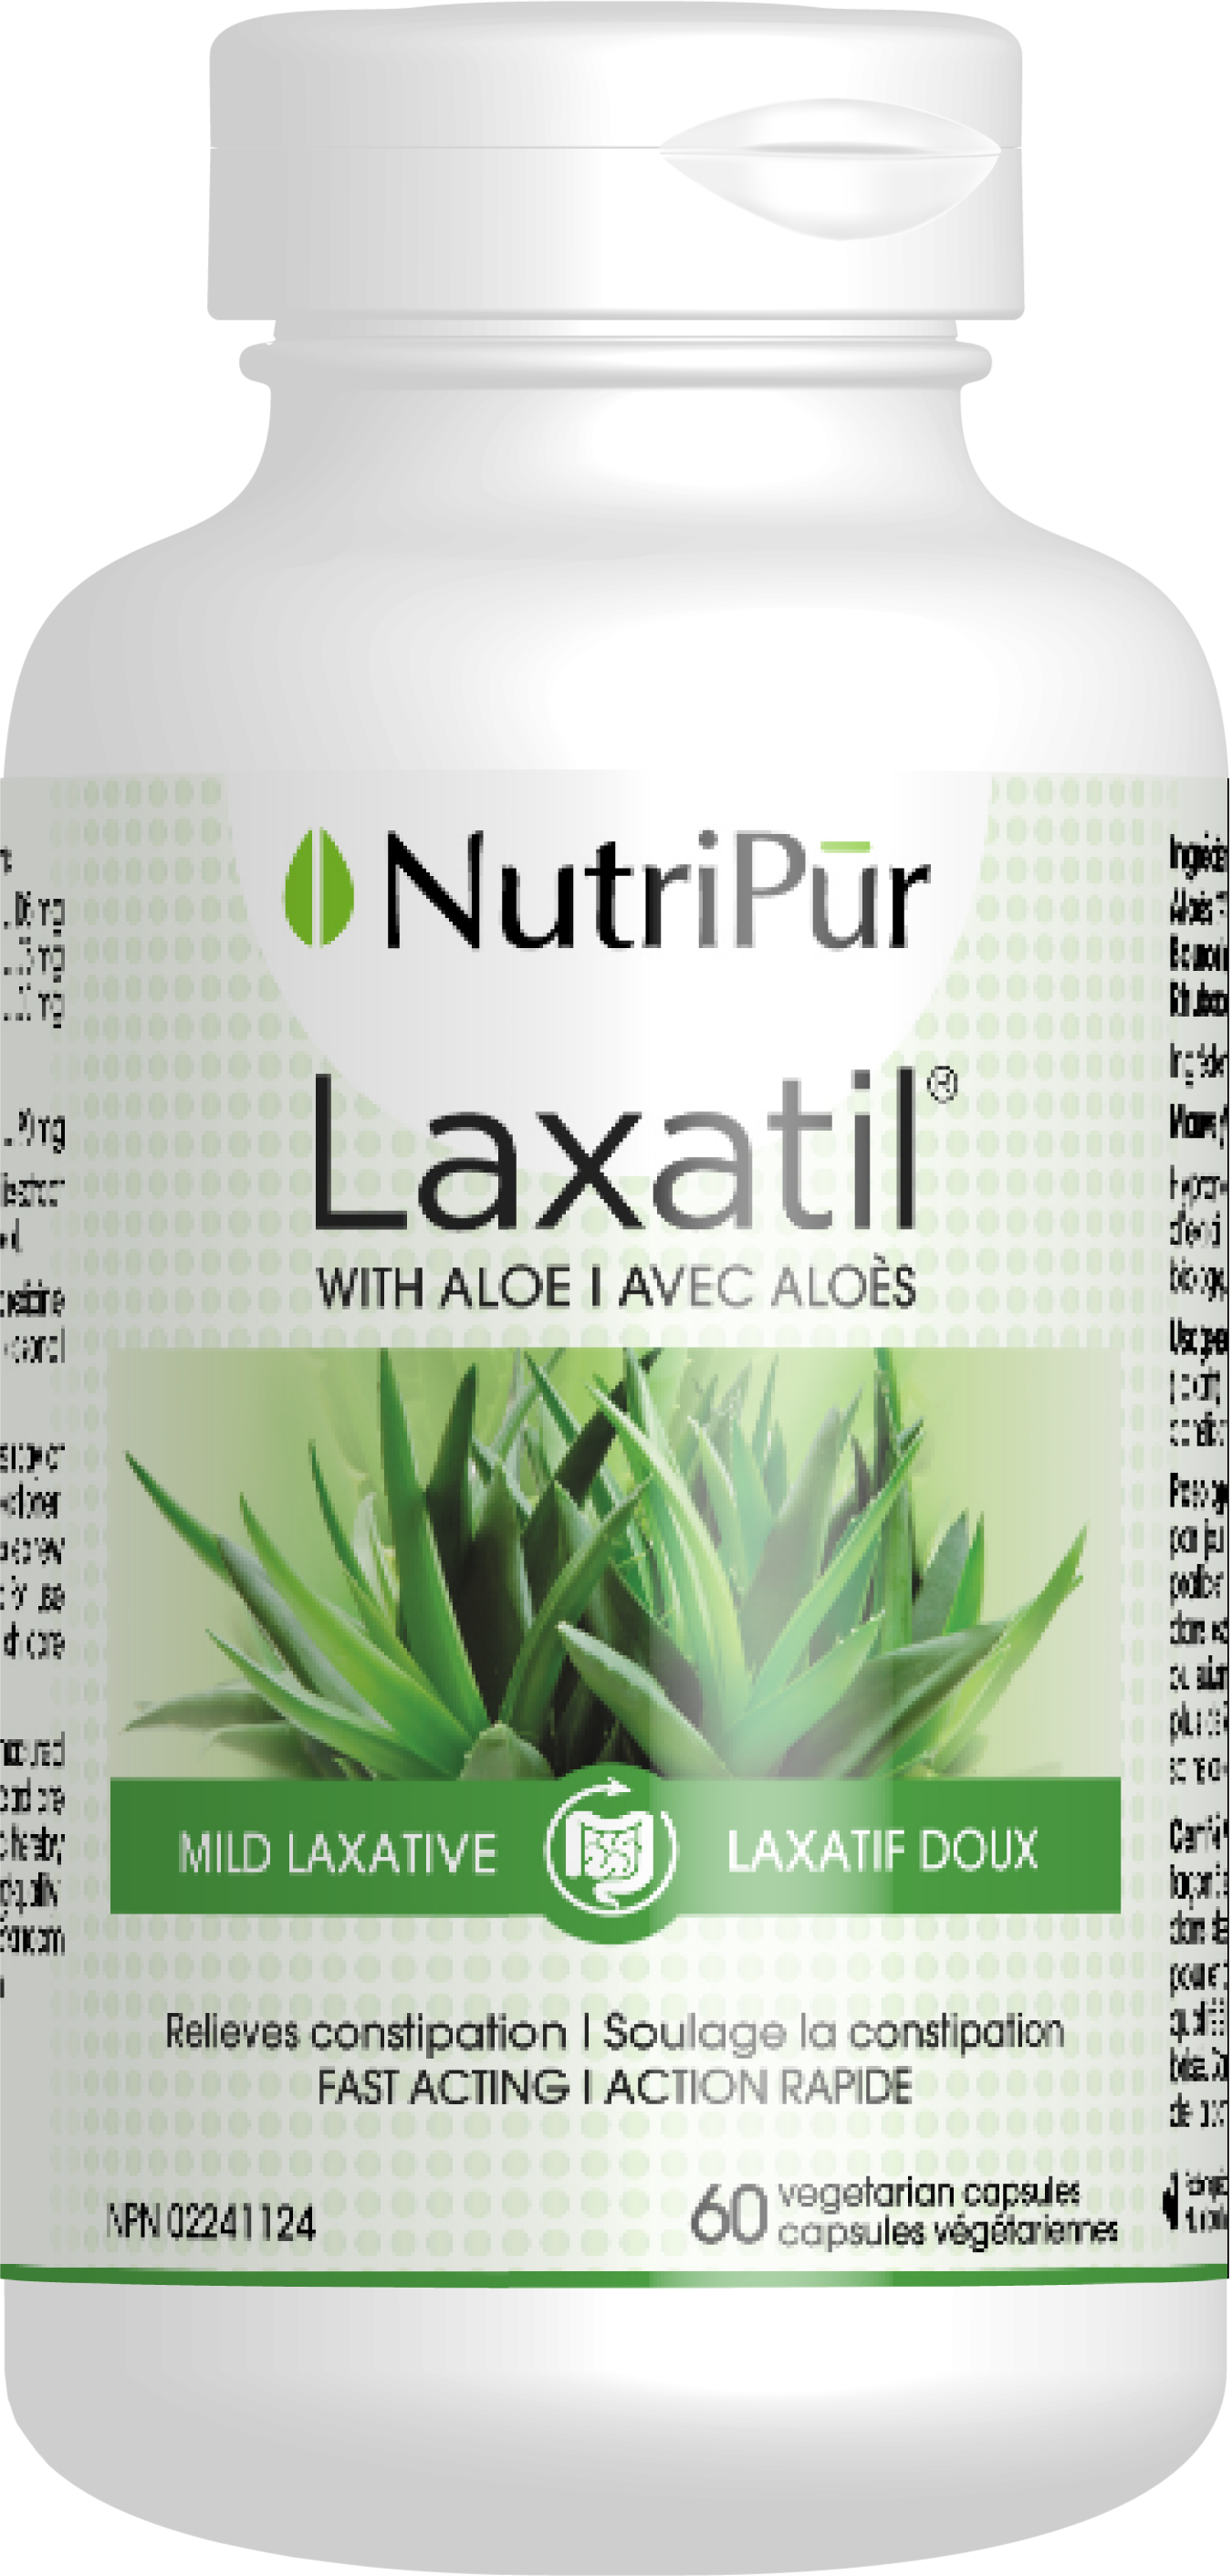 Laxatil - Nutripur - Aloe vera with 18% Aloin - mild laxatil - relieves constipation 